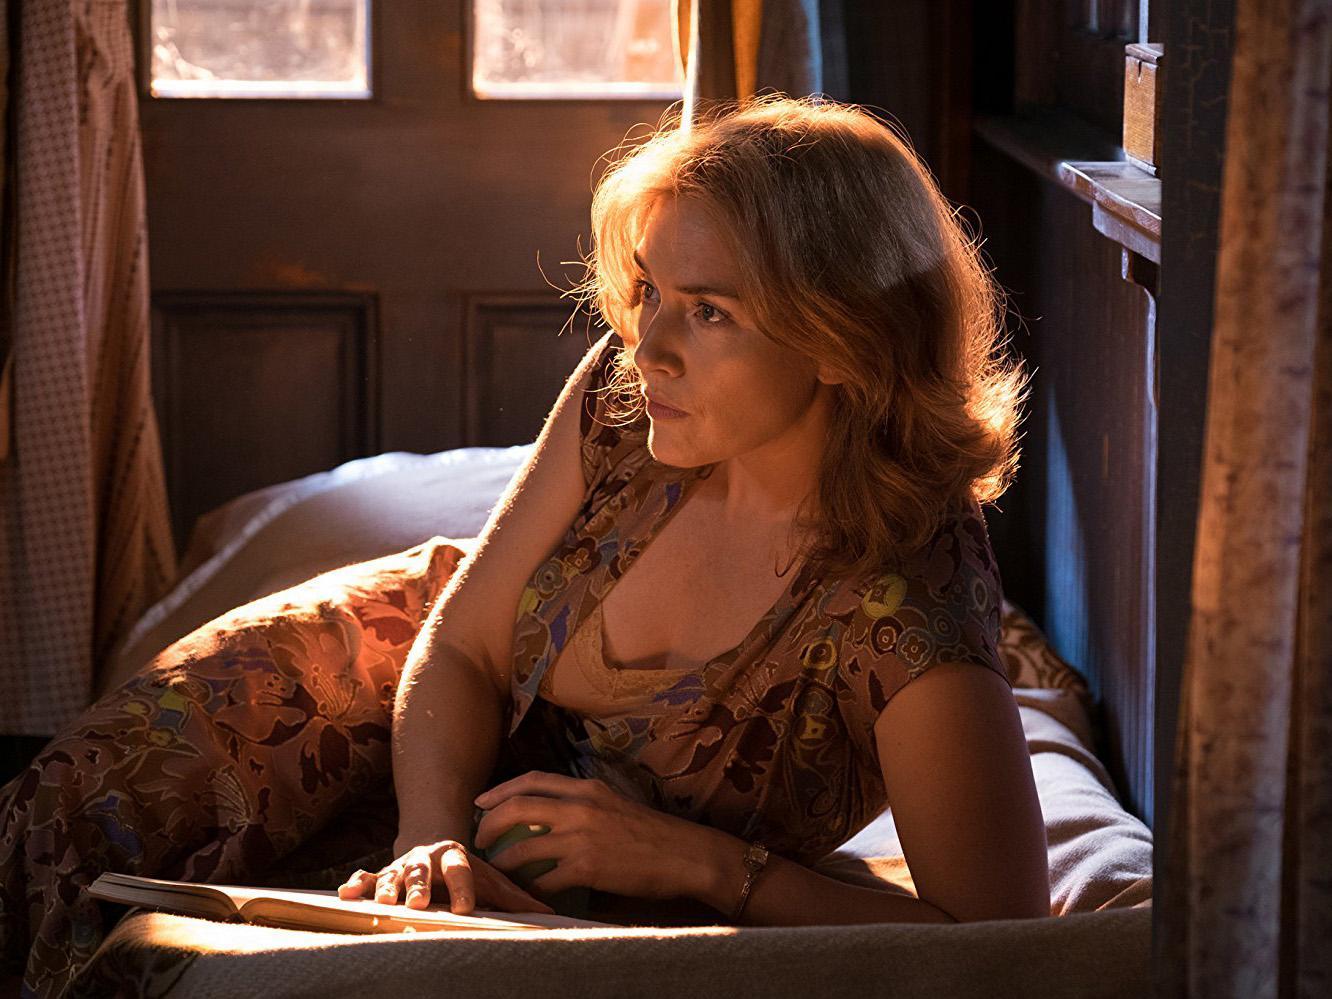 Winslet stars as a woman who unravels in the new Woody Allen film 'Wonder Wheel'